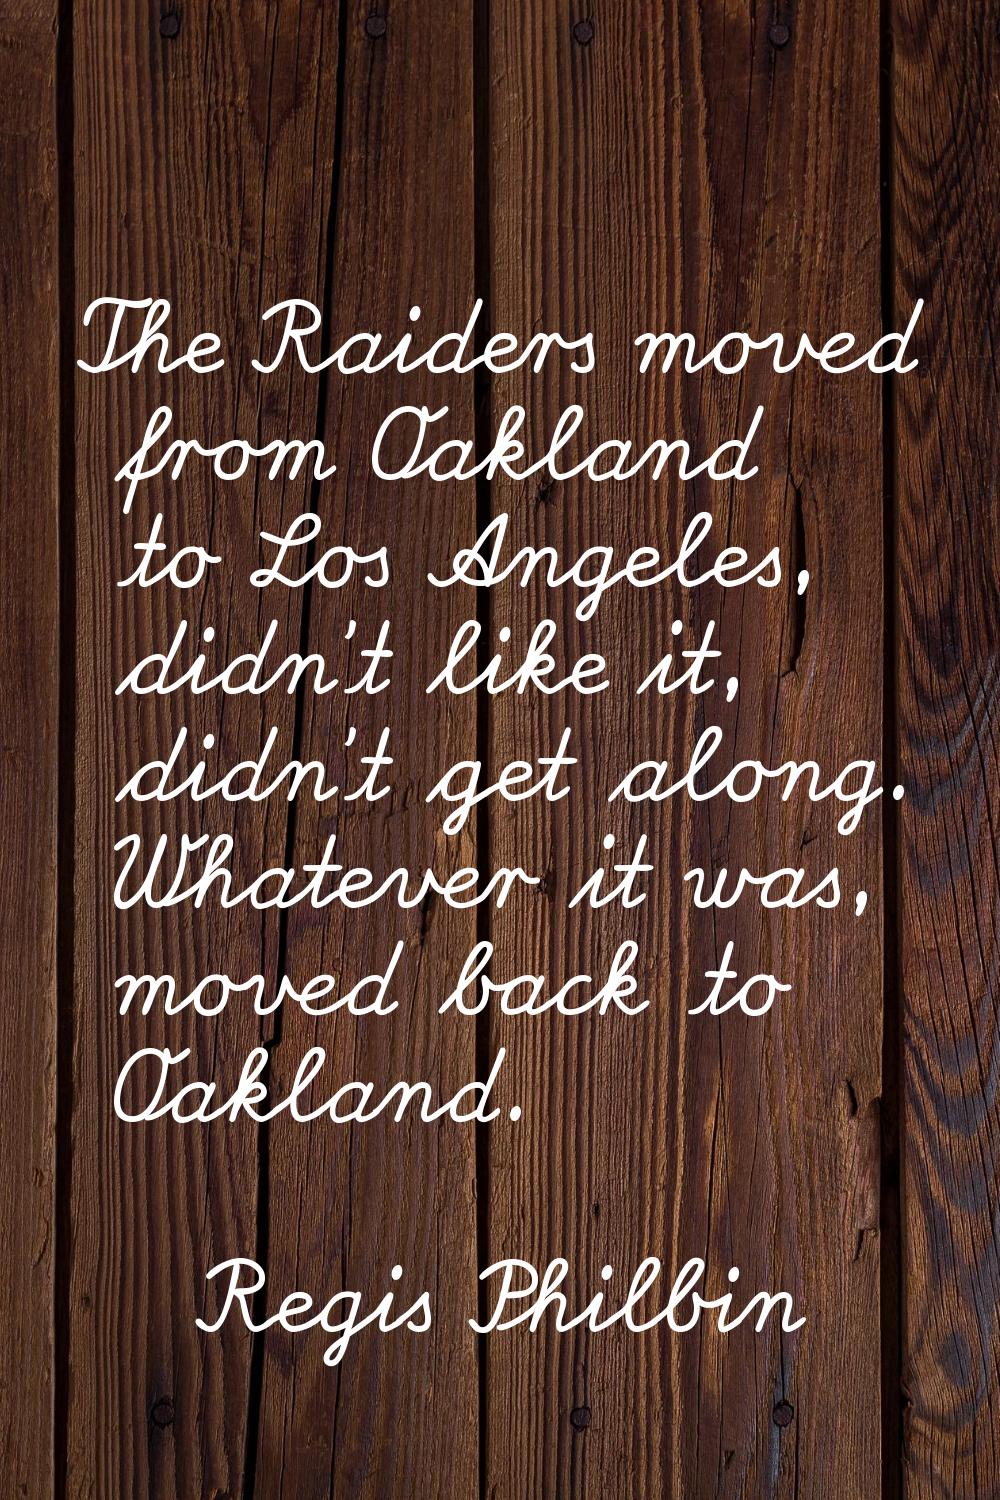 The Raiders moved from Oakland to Los Angeles, didn't like it, didn't get along. Whatever it was, m